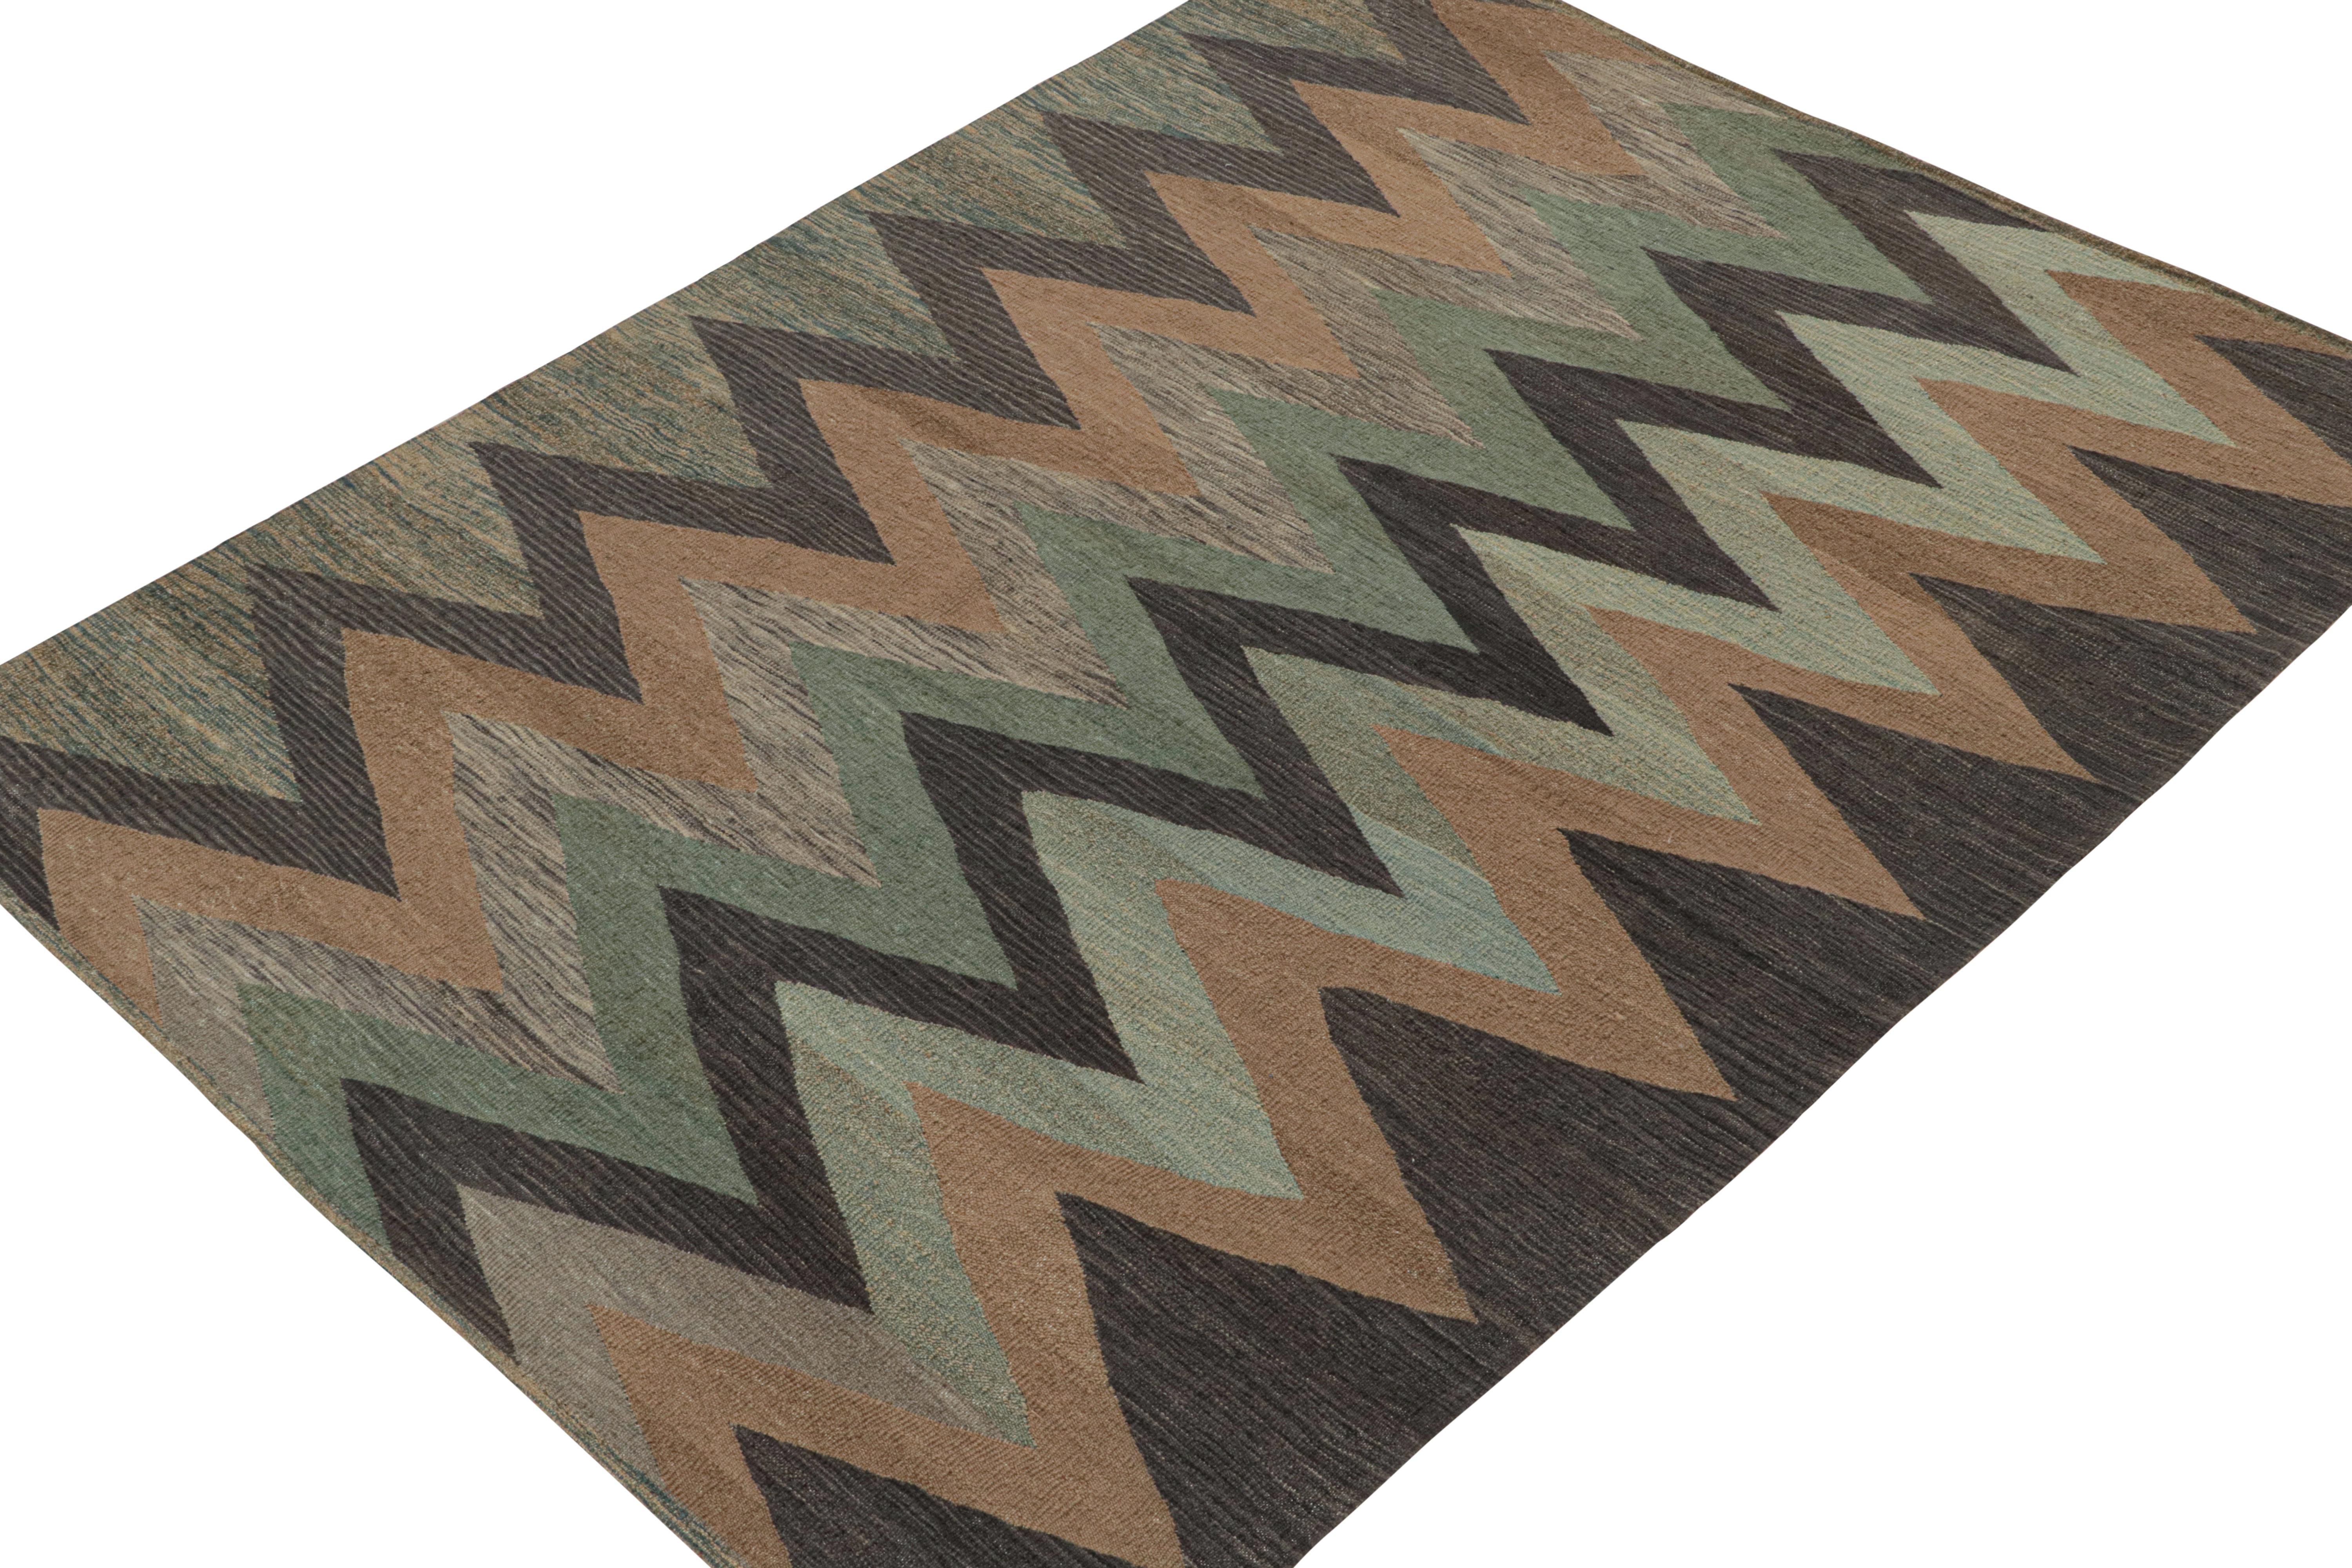 Hand-Knotted Vintage Persian Kilim in Brown and Teal Chevron Patterns by Rug & Kilim For Sale